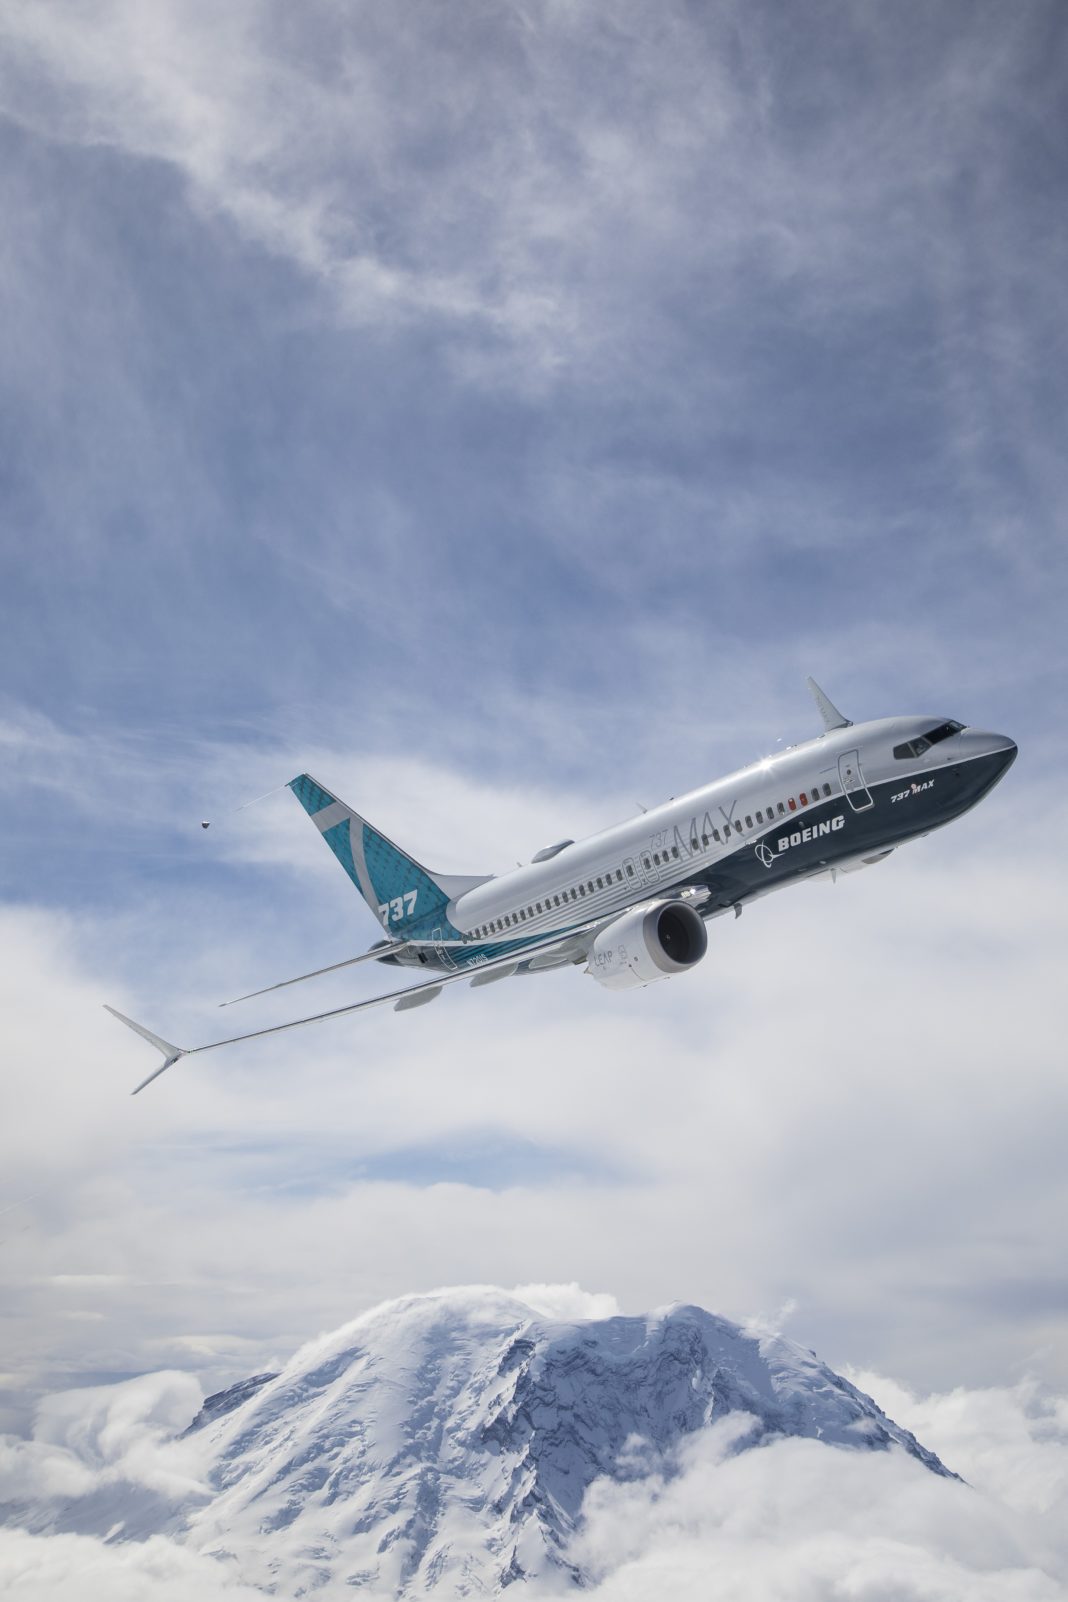 Boeing 737 Max jets grounding having an impact.